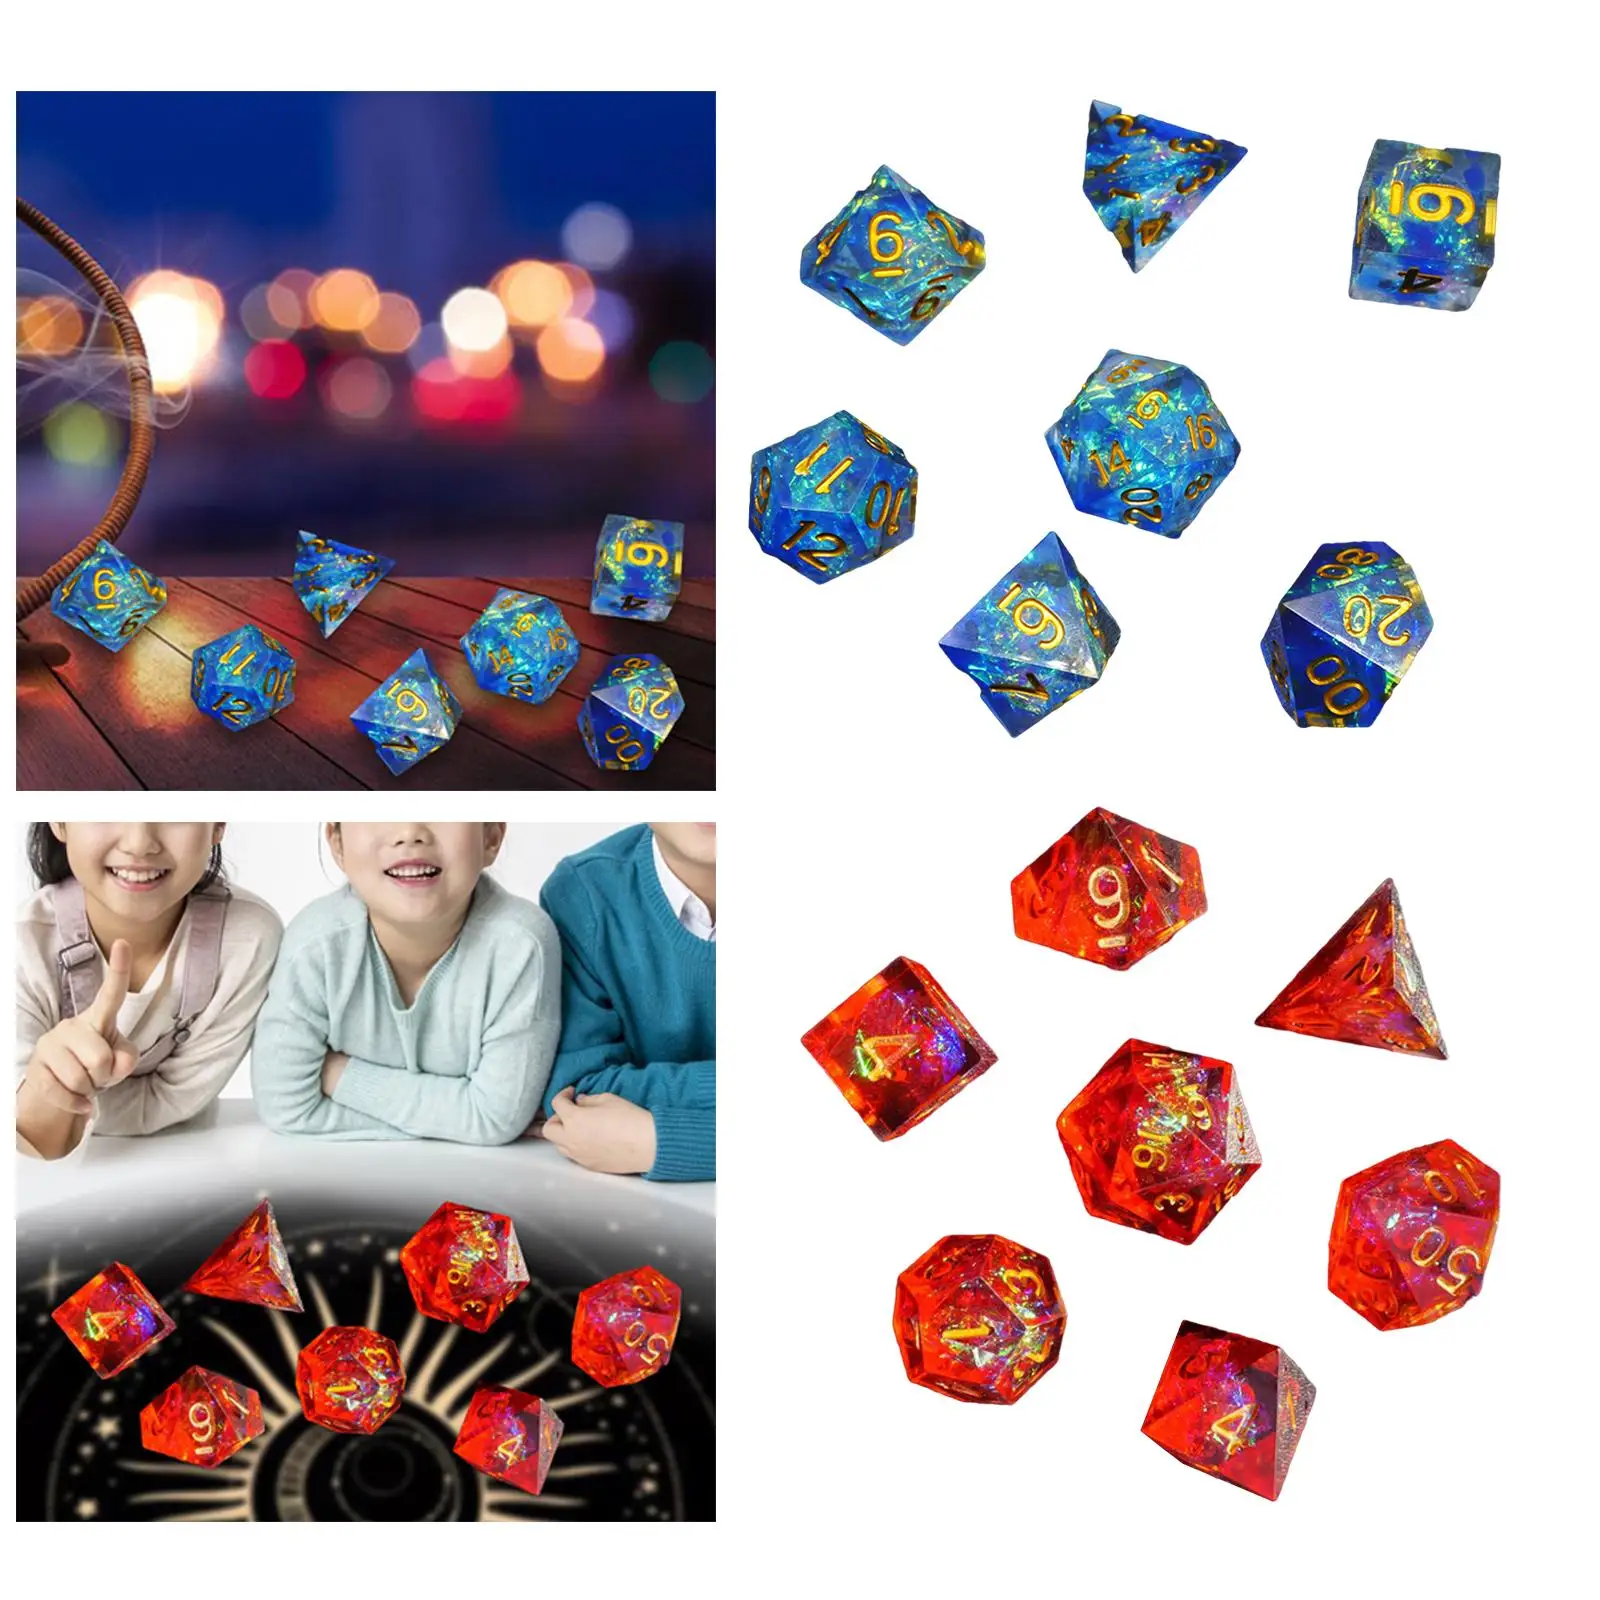 7Pcs Multifaceted Polyhedral Dice Entertainment Toys Table Game Toy for Home Party Game Tabletop Game